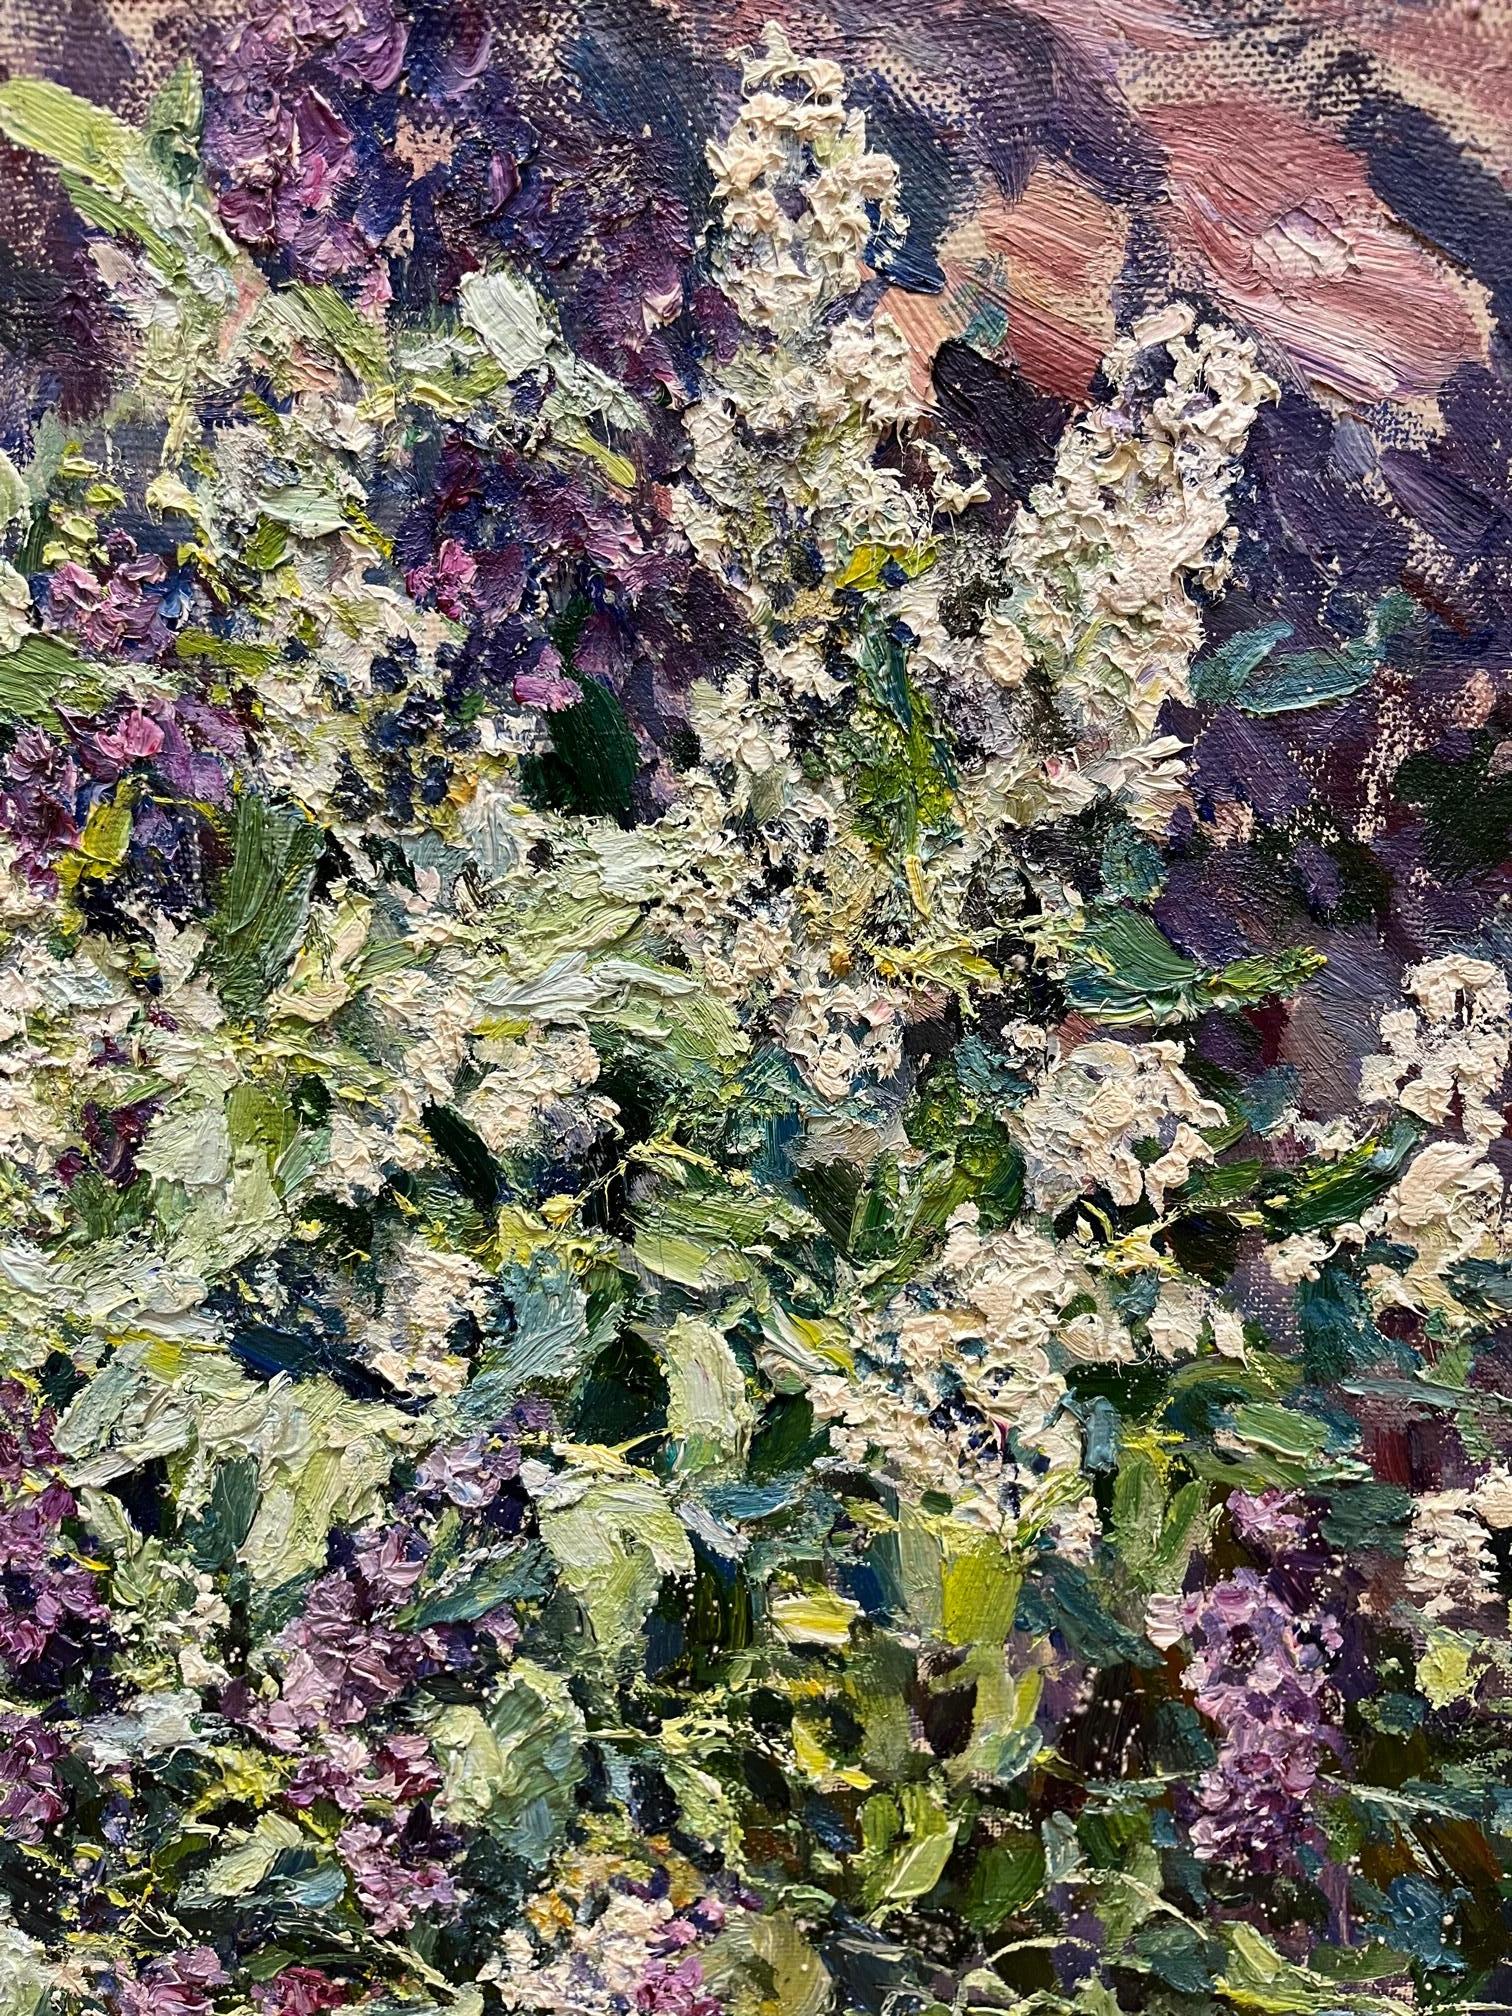 Flowers,Garden ,Lilac ,Purple , white,Spring


Georgij MOROZ (Dneprodzerzinsk, Ucraina, 1937 - St. Petersburg, 2015)
MUSEUMS
Moscow, Tret’jakov Gallery
Moscow, USSR Artists Collection
Moscow, The Ministry of Culture Collection
St. Petersburg,